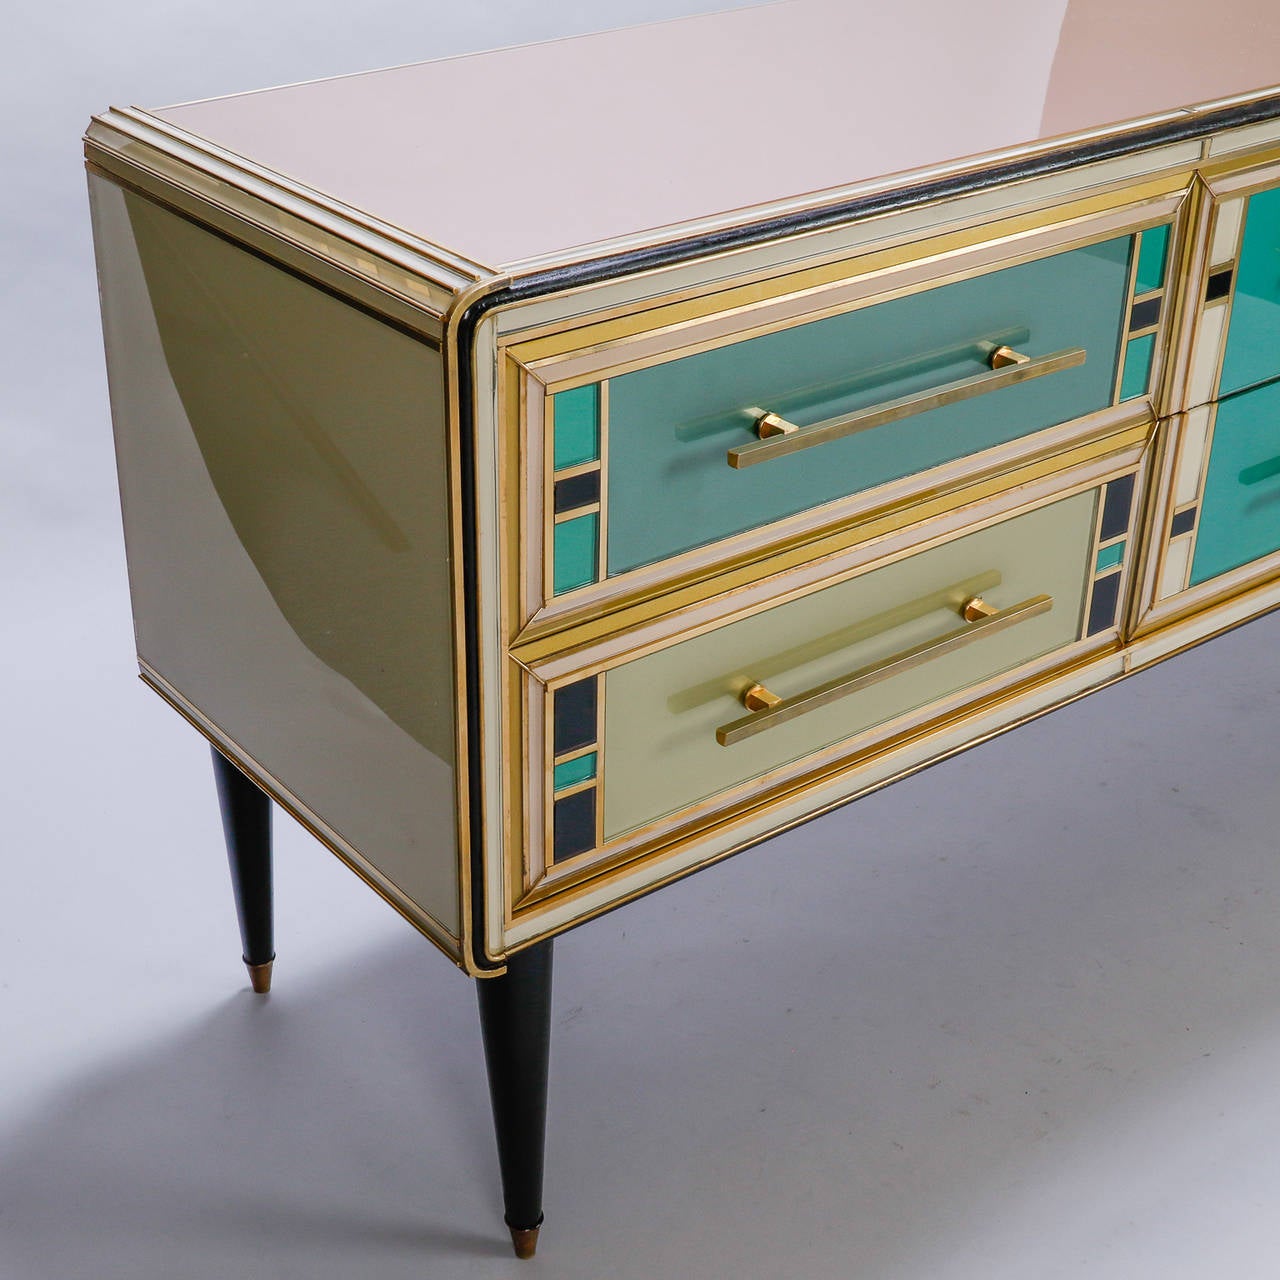 This circa 1990s sideboard has a black painted wood base with tapered legs, polished brass hardware and multicolored Murano glass panel overlays. Simply stunning. This is attributed to one of the early collections designer Emanuel Ungaro created for